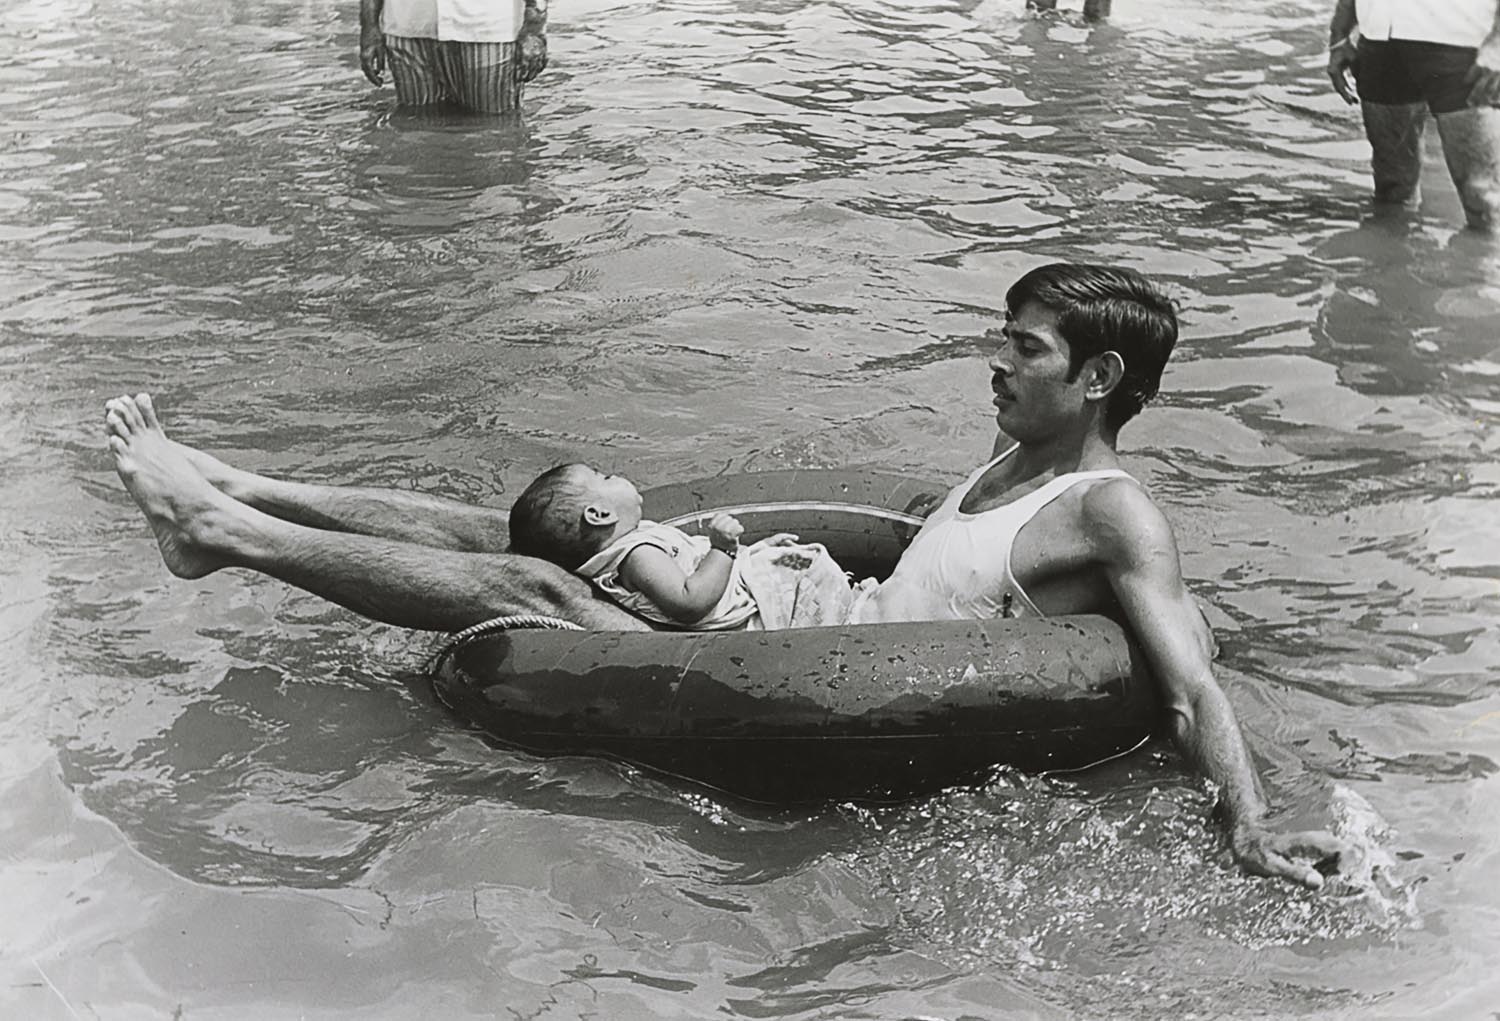 A man on a rubber float with a baby on his lap, carrying themselves to safety during a flood.